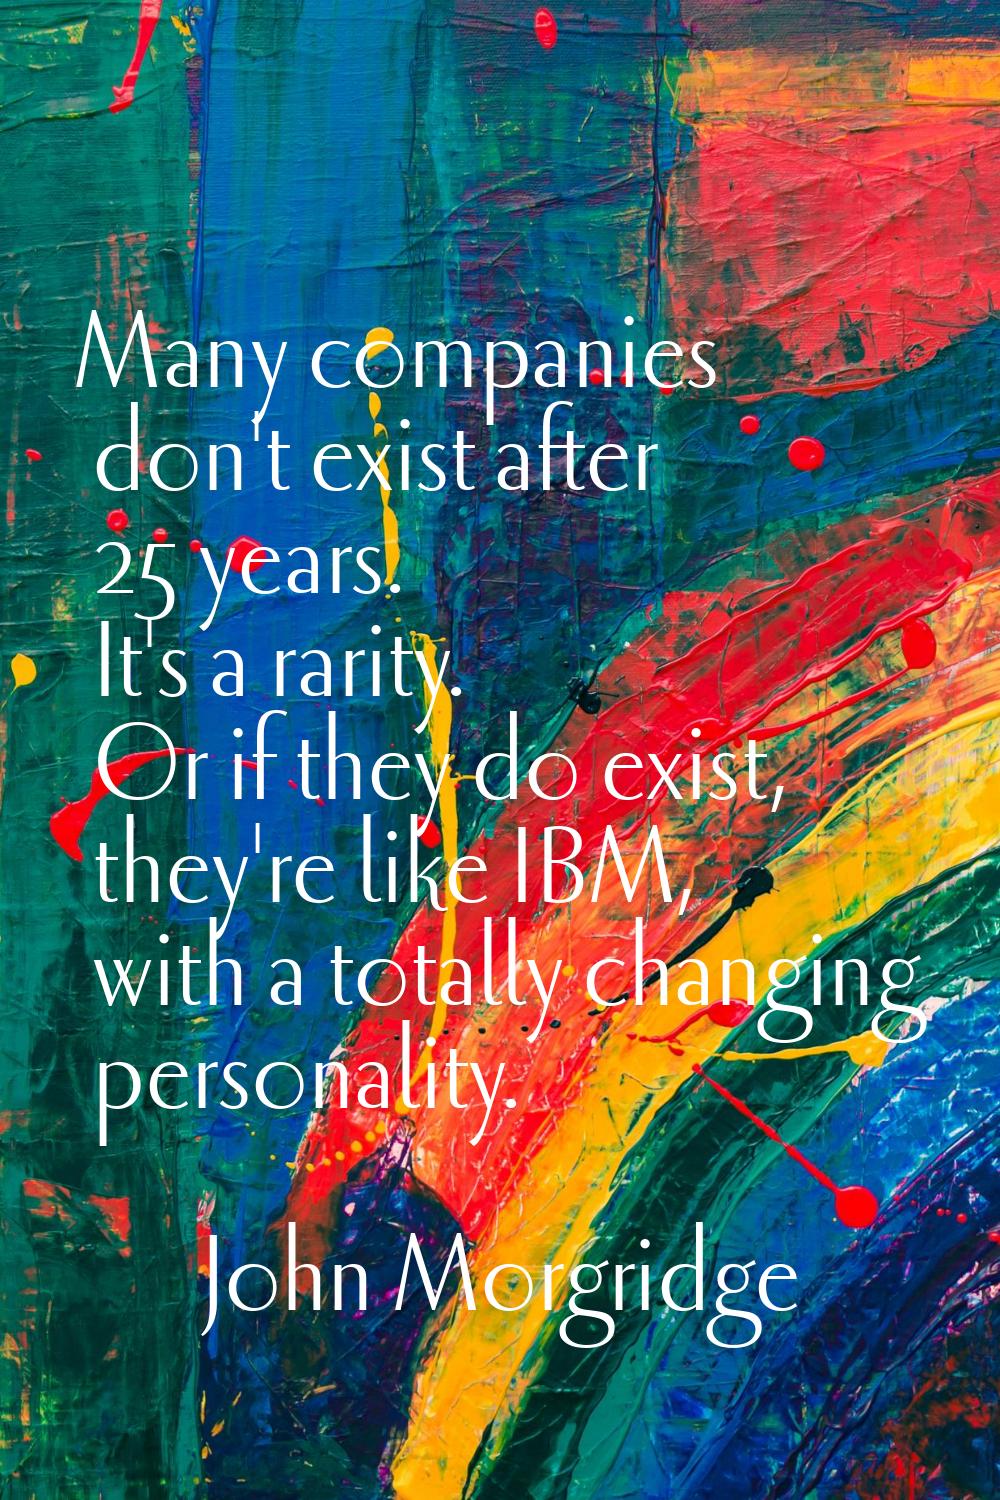 Many companies don't exist after 25 years. It's a rarity. Or if they do exist, they're like IBM, wi